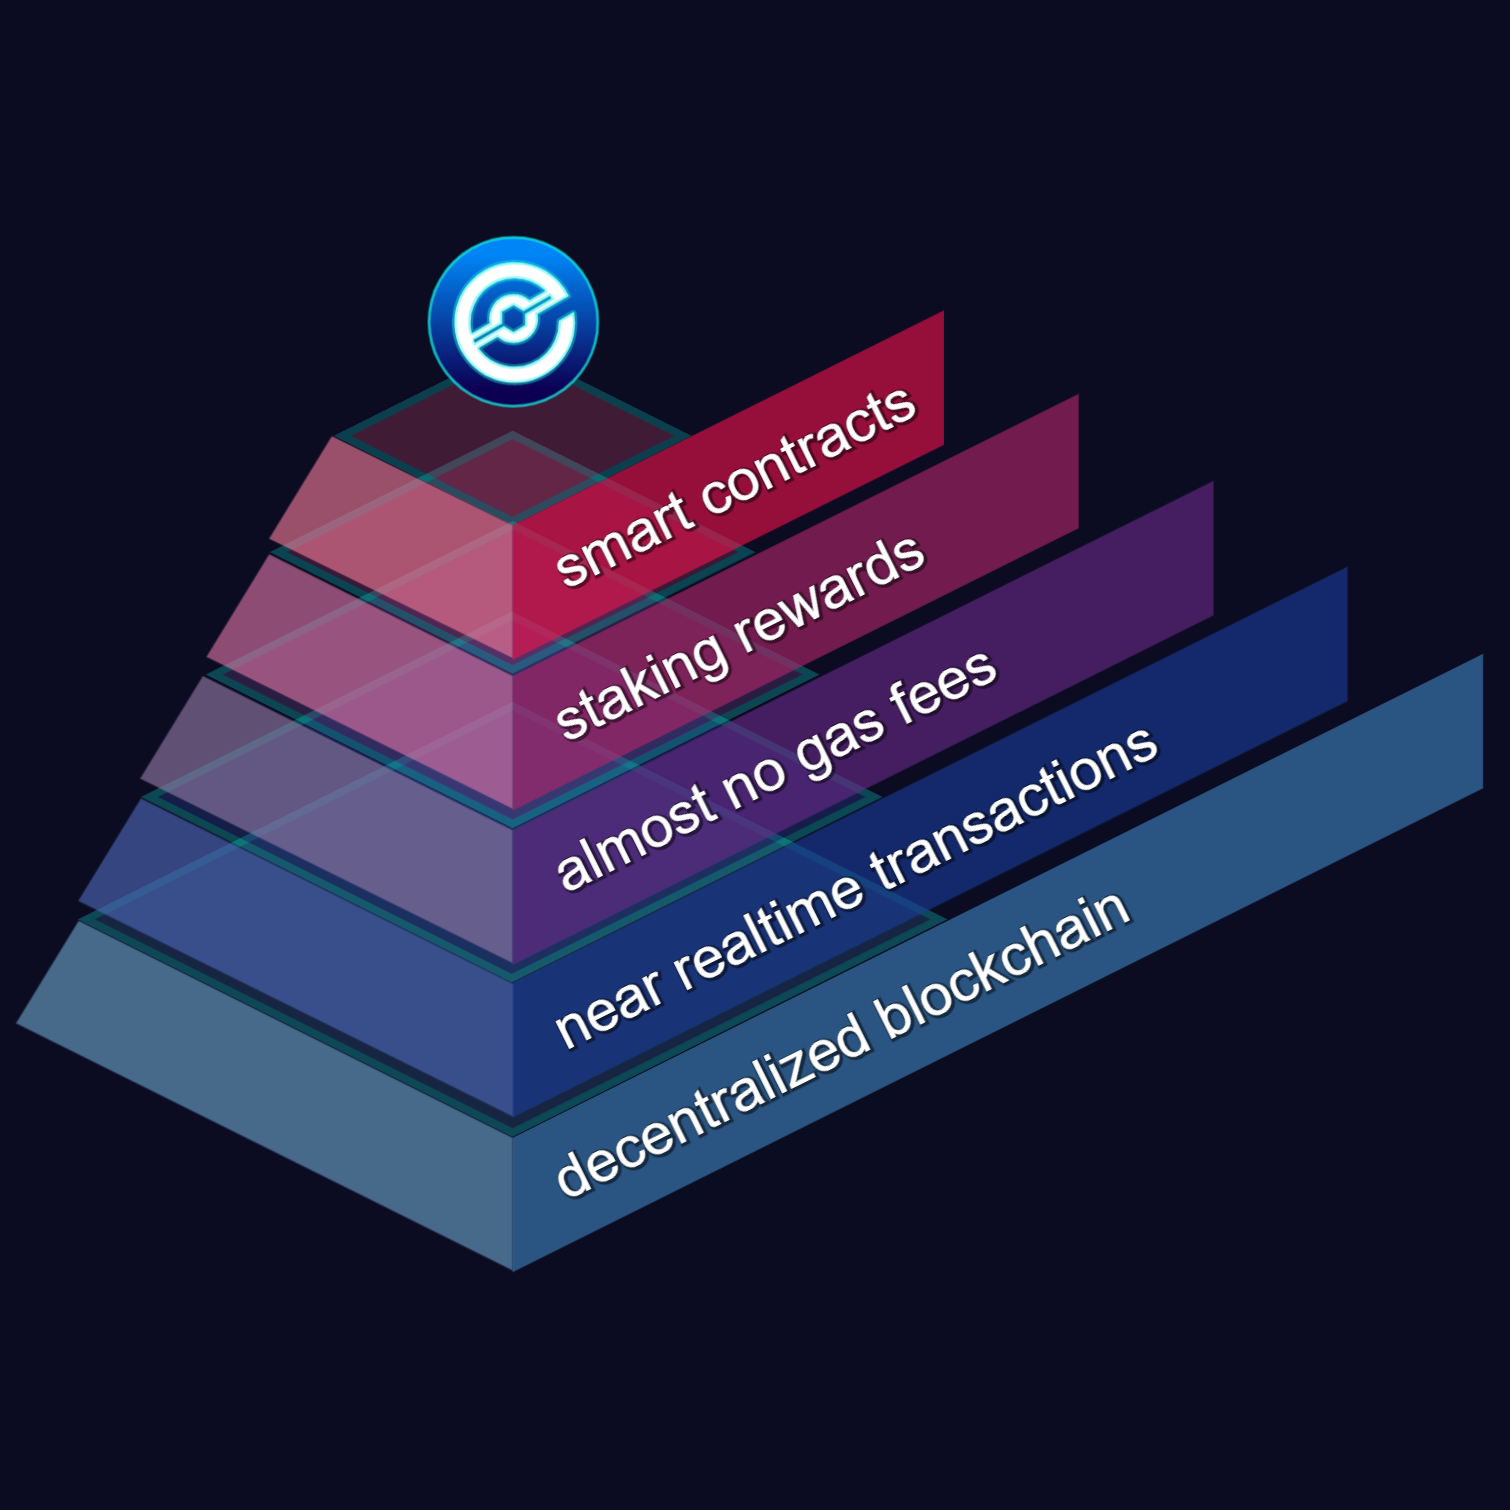 2022 blockchain - innovative blockchain - Electra Protocol - XEP - smart contracts - staking rewards - almost no gas fees - near realtime transactions - decentralized blockchain - pyramid